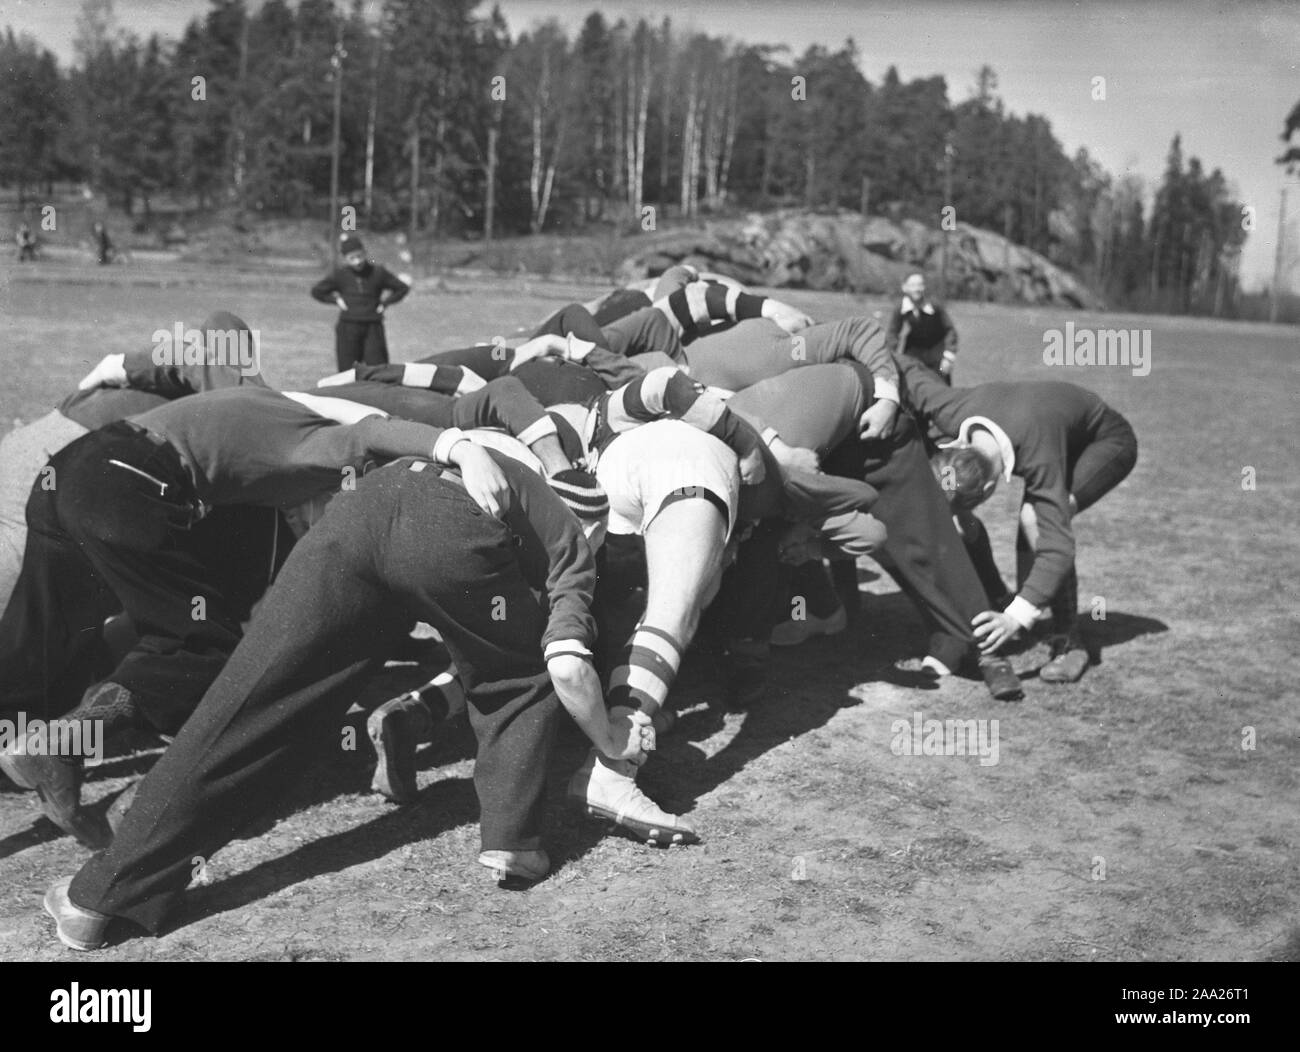 1940s rugby. A group of rugby players are practising on a sunny spring day. The focus is on the ball and all players try their best to get their hands on it. Sweden May 2 1940. Kristoffersson ref 128-12 Stock Photo